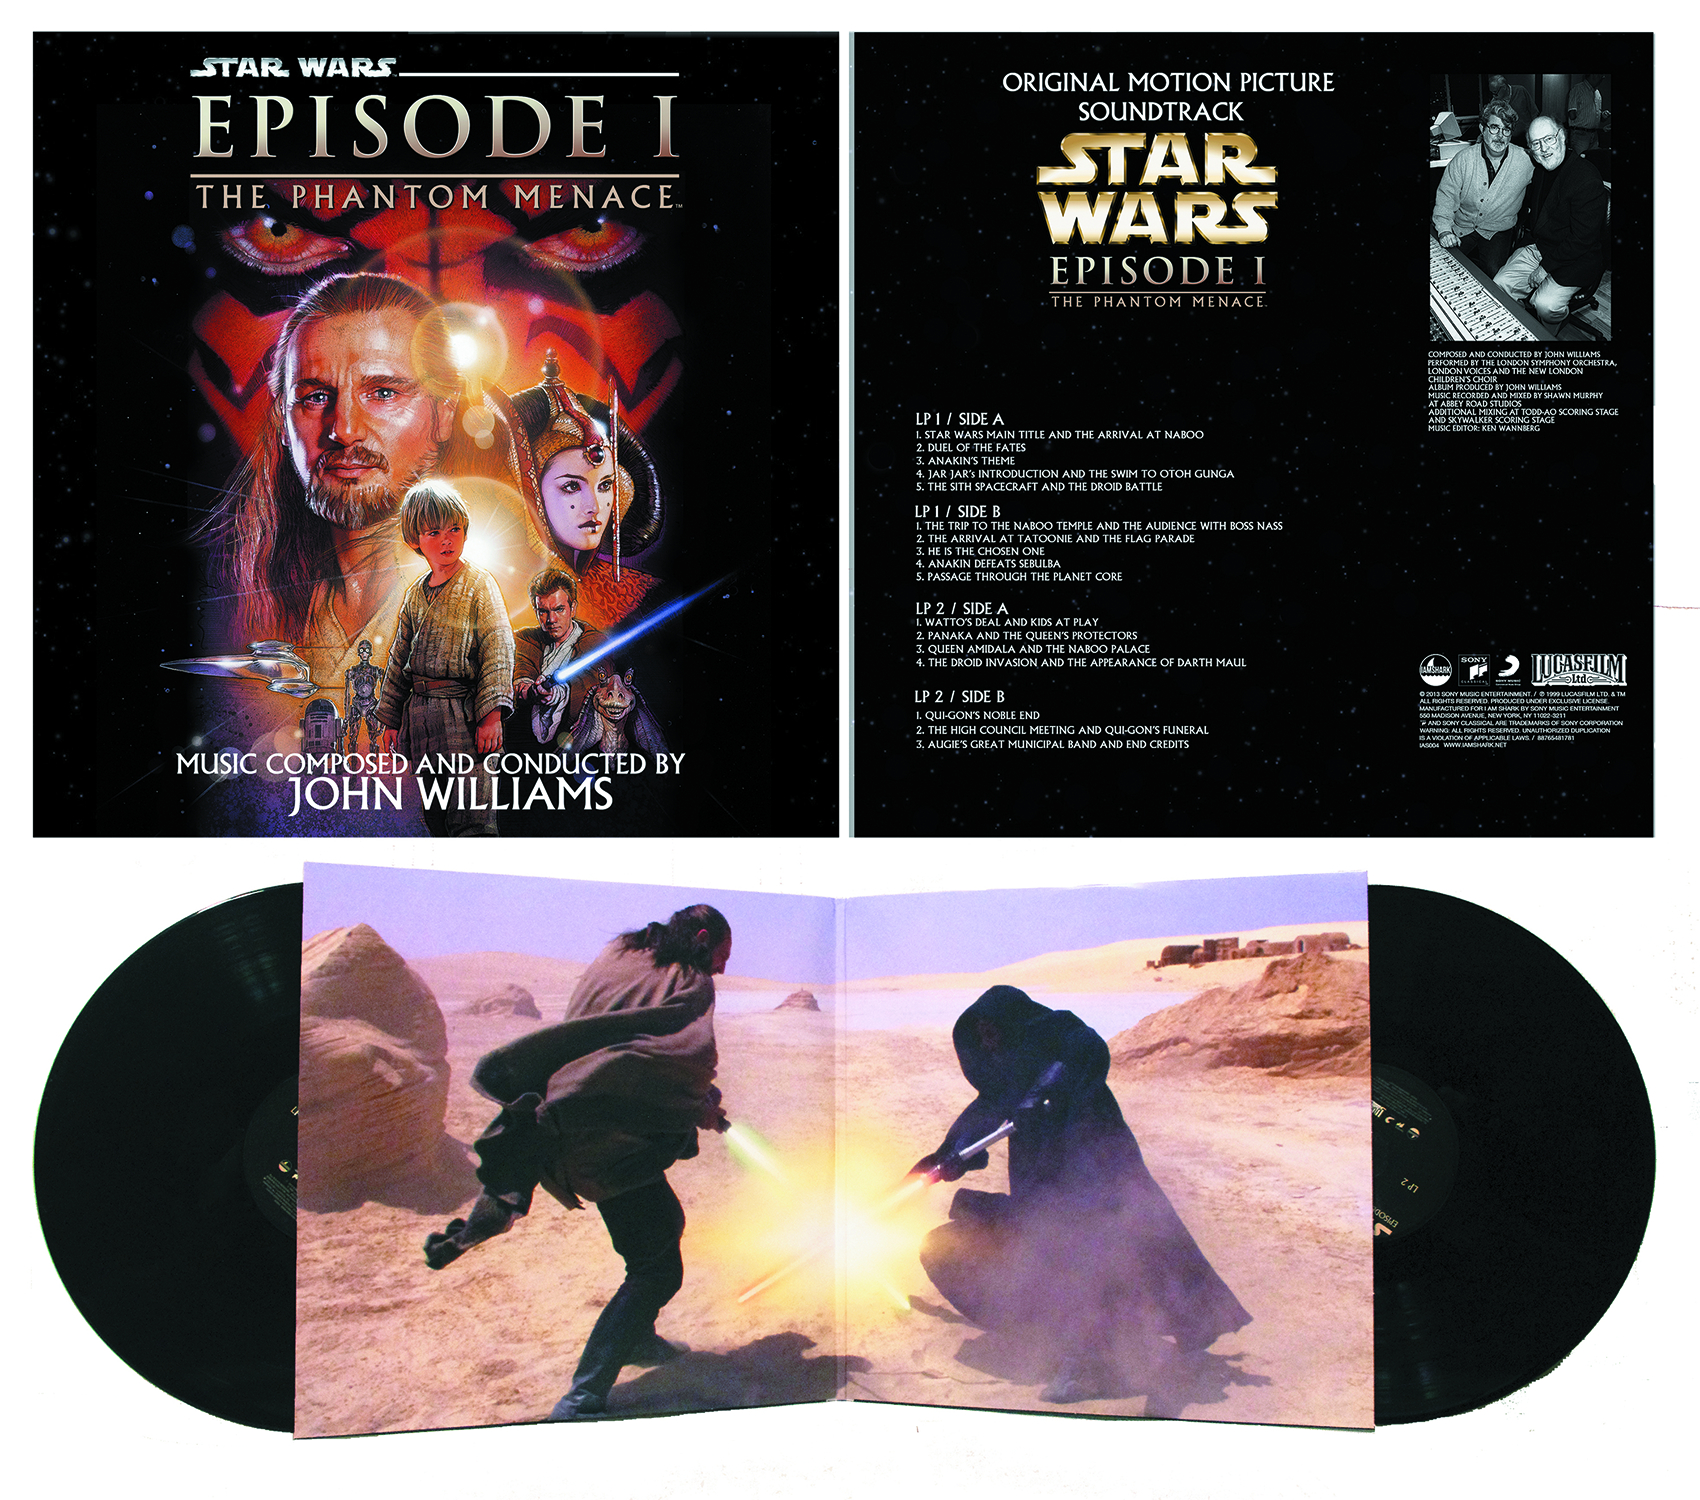 Phantom Menace OST. Star Wars Episode i: the Phantom Menace (игра). Star Wars - Episode i - Battle for Naboo. Augie's great Municipal Band. Soundtrack episode